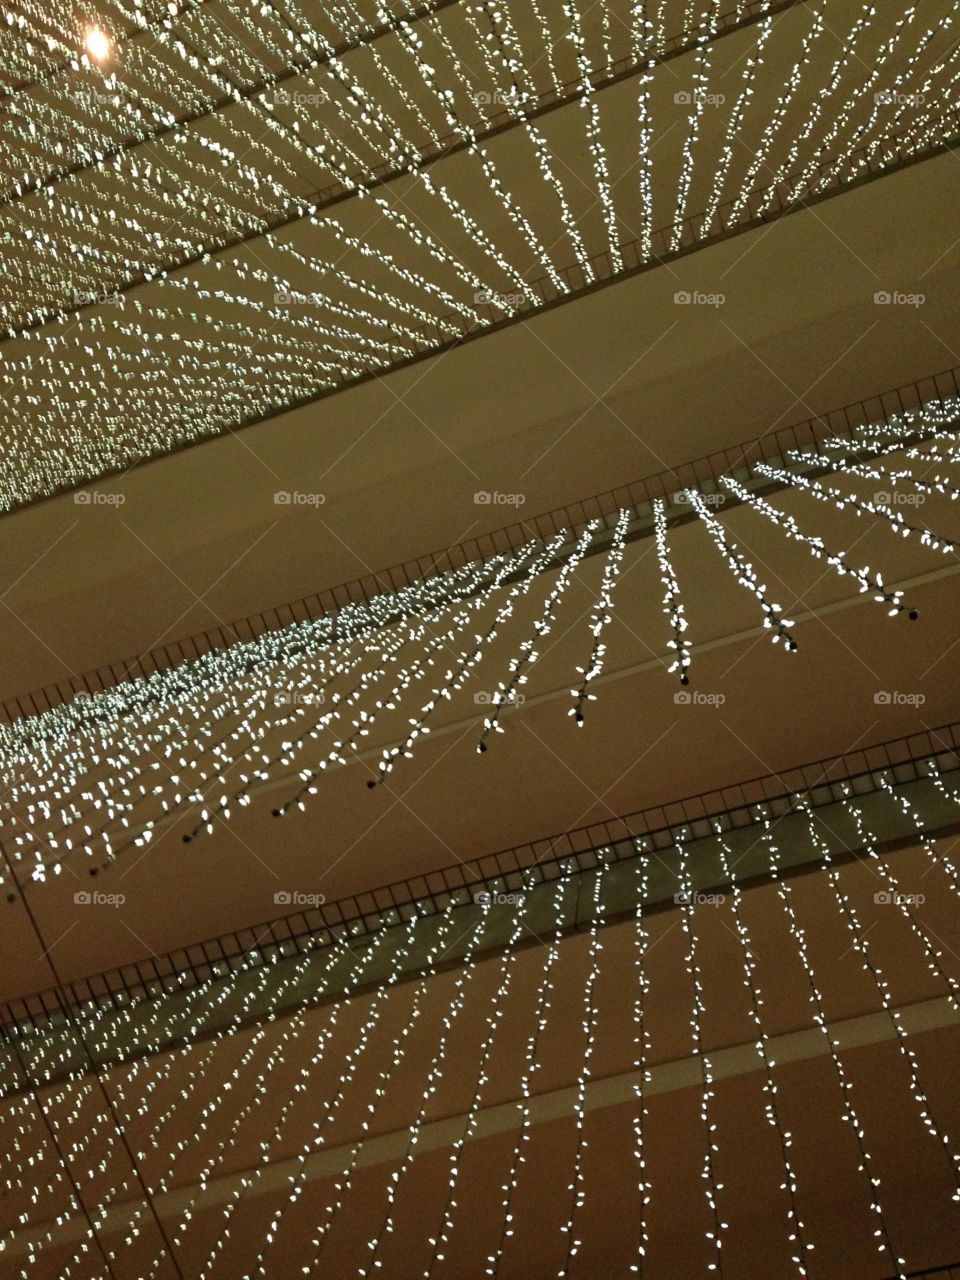 Dangling Lights . I was inside a hotel in San fransico and I looked up and this is what I saw 